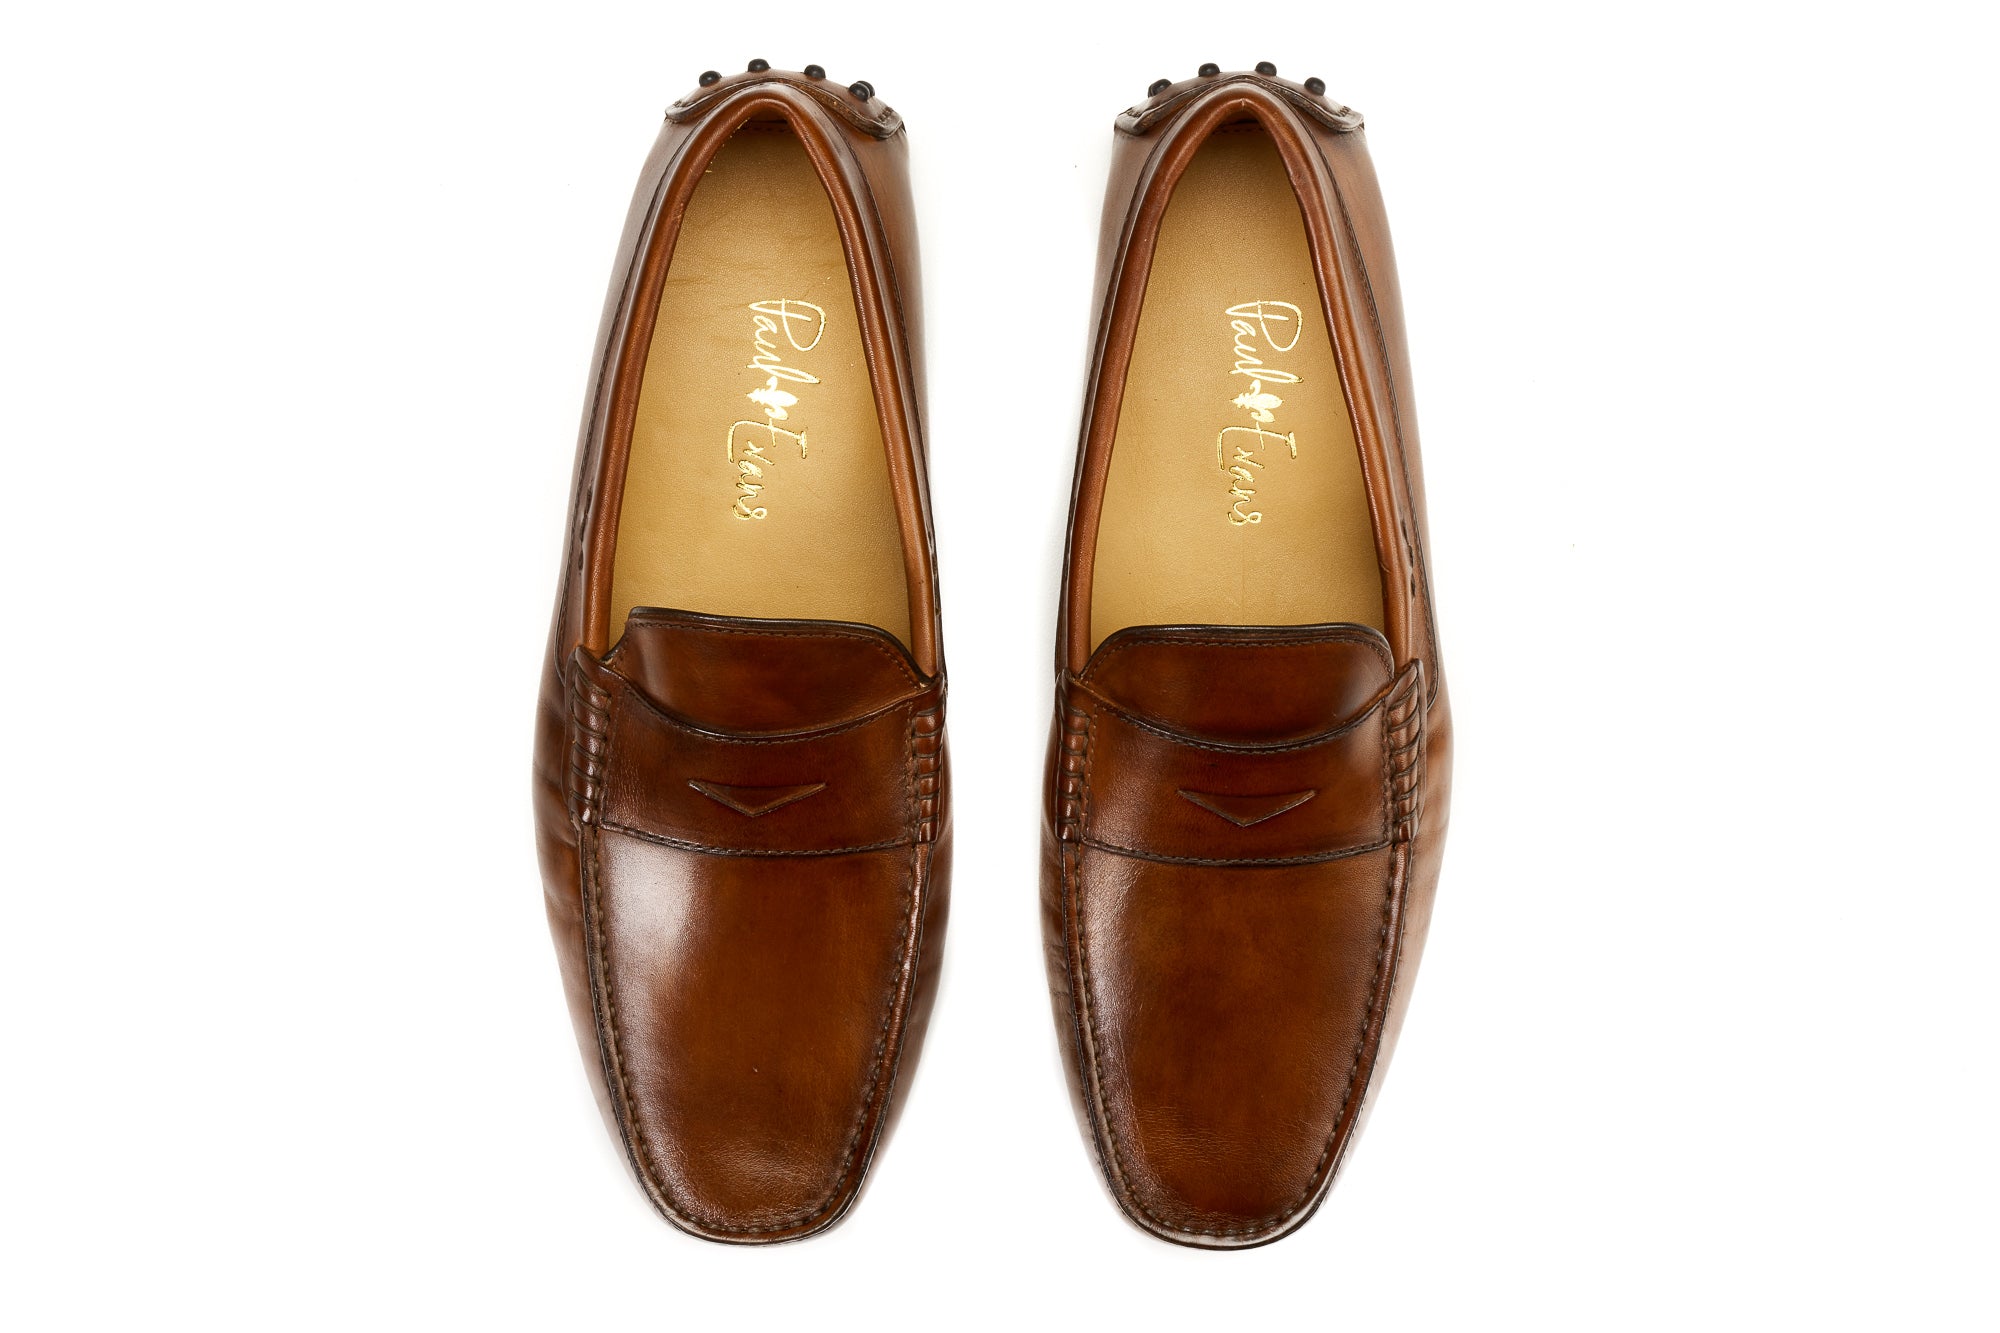 The McQueen Driving Loafer - Marrone